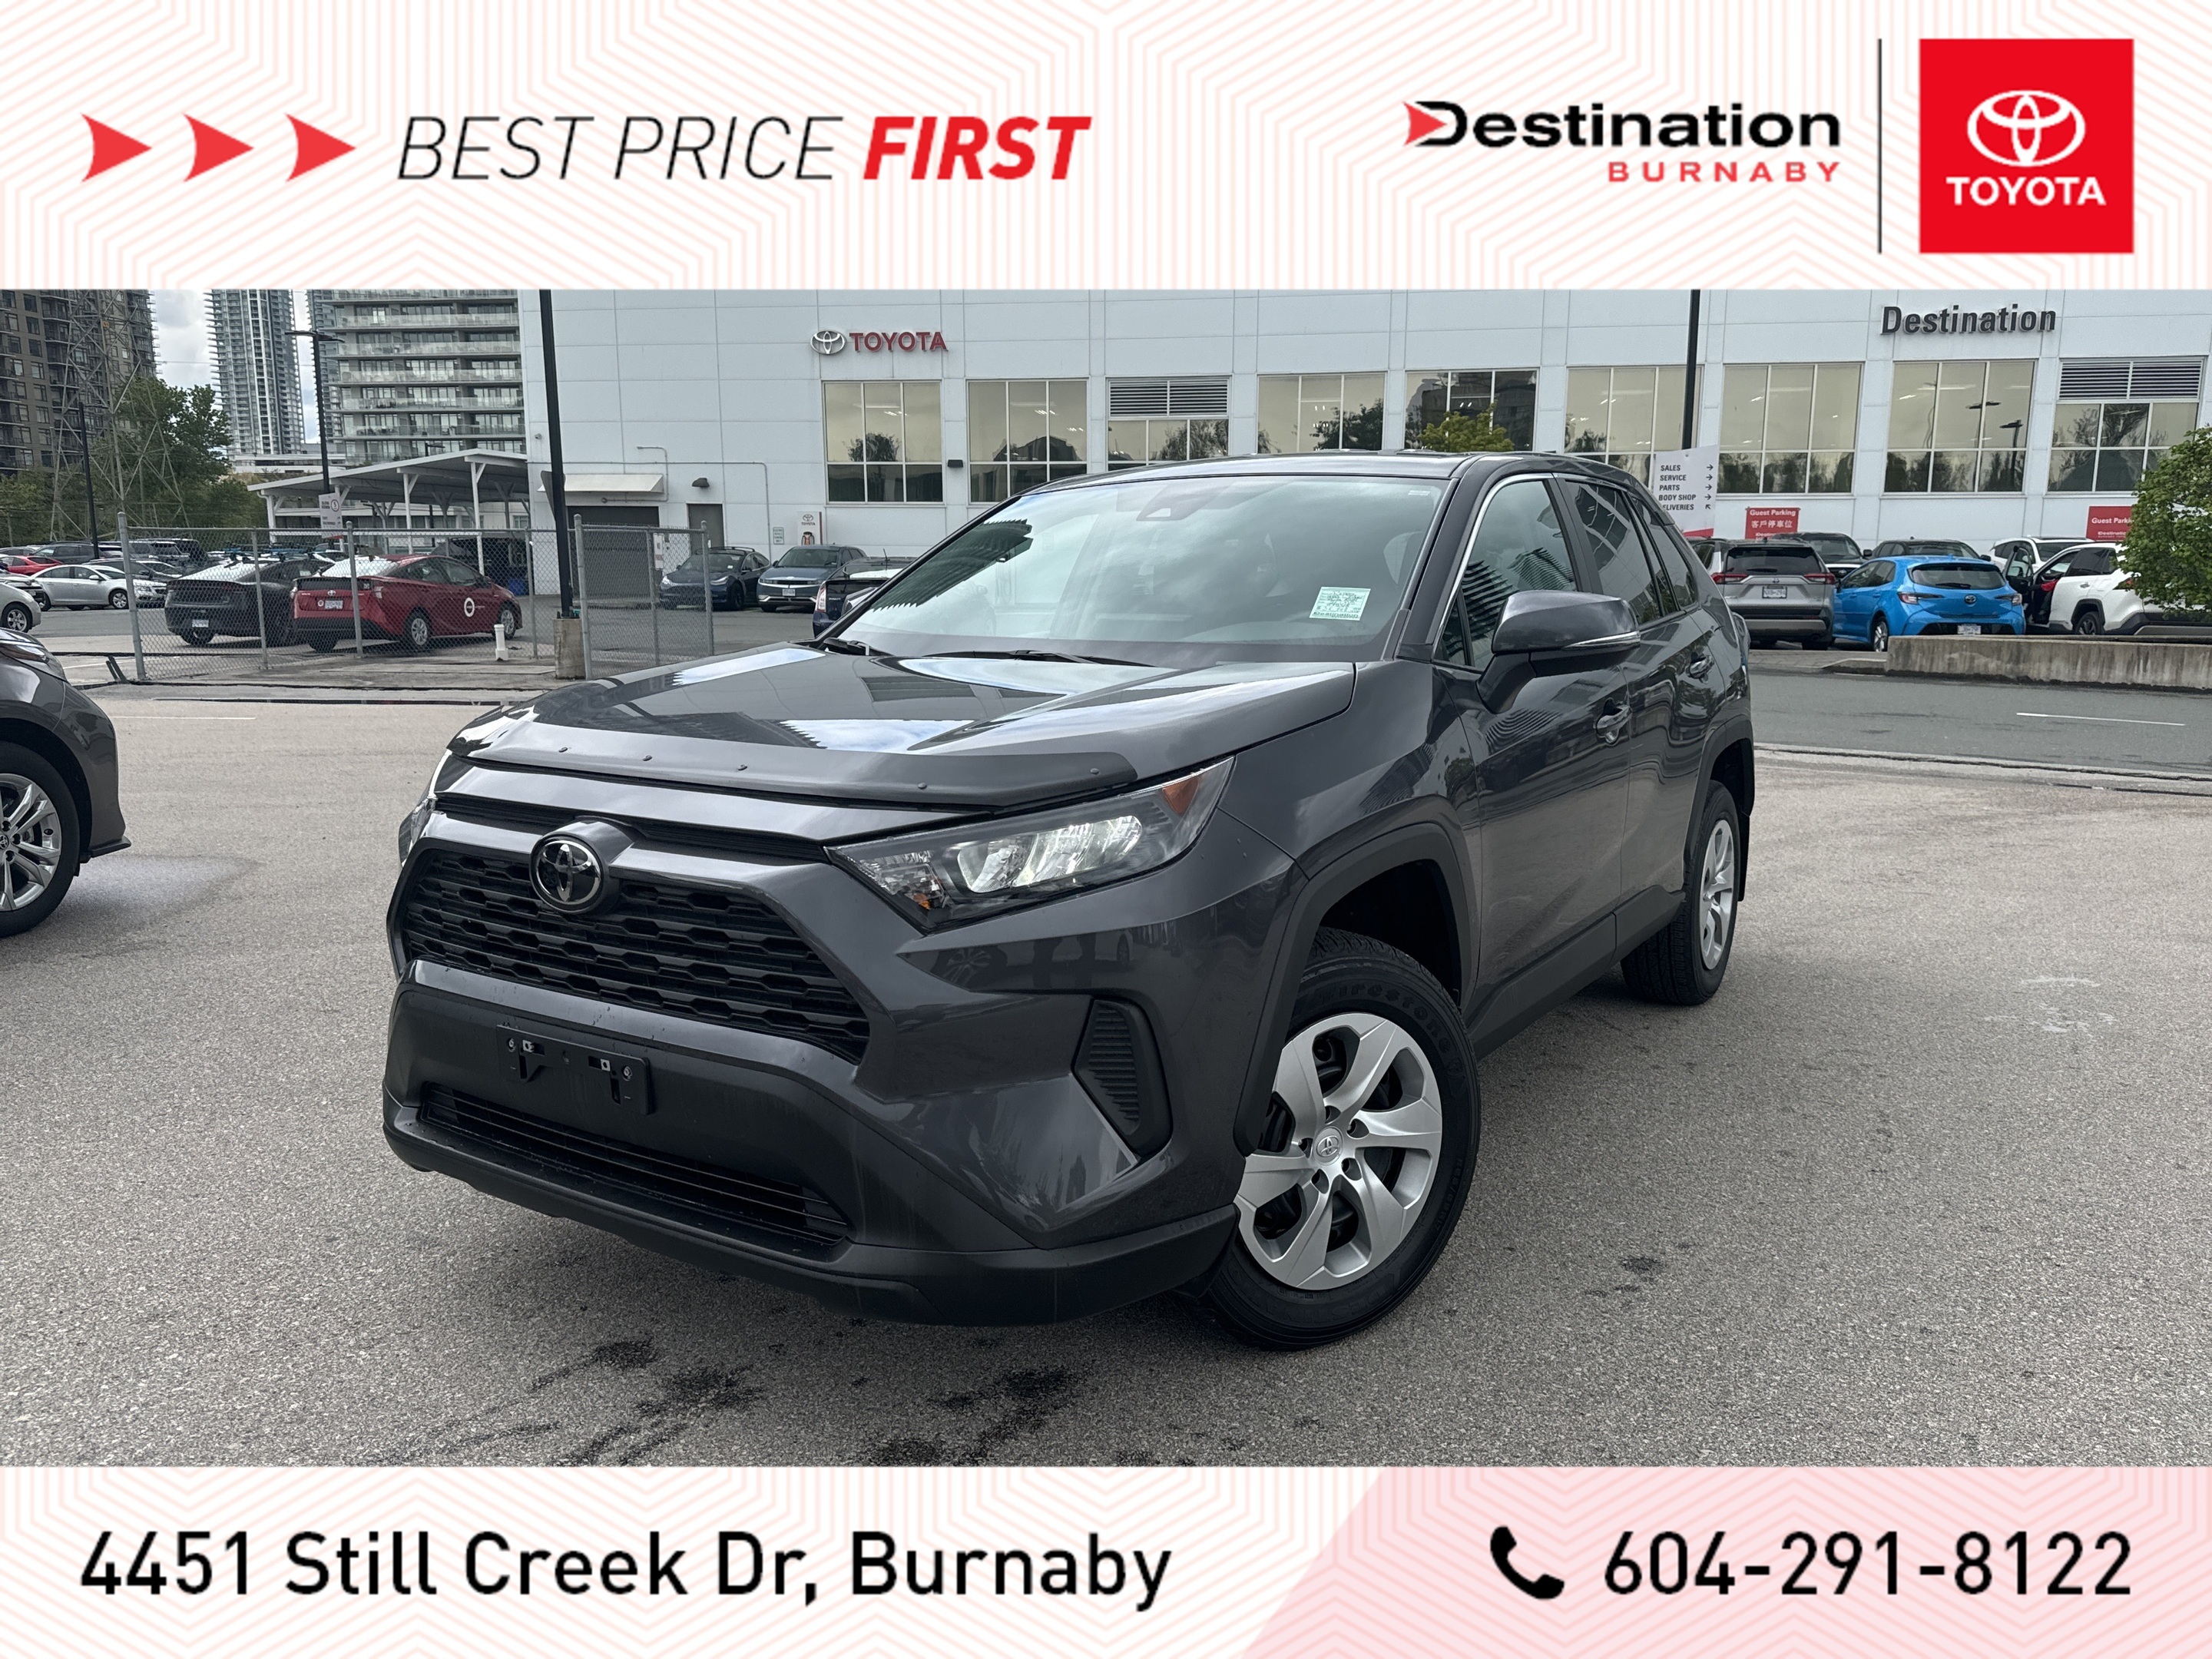 2022 Toyota RAV4 LE AWD - Local BC car with 1 owner, no accidents!